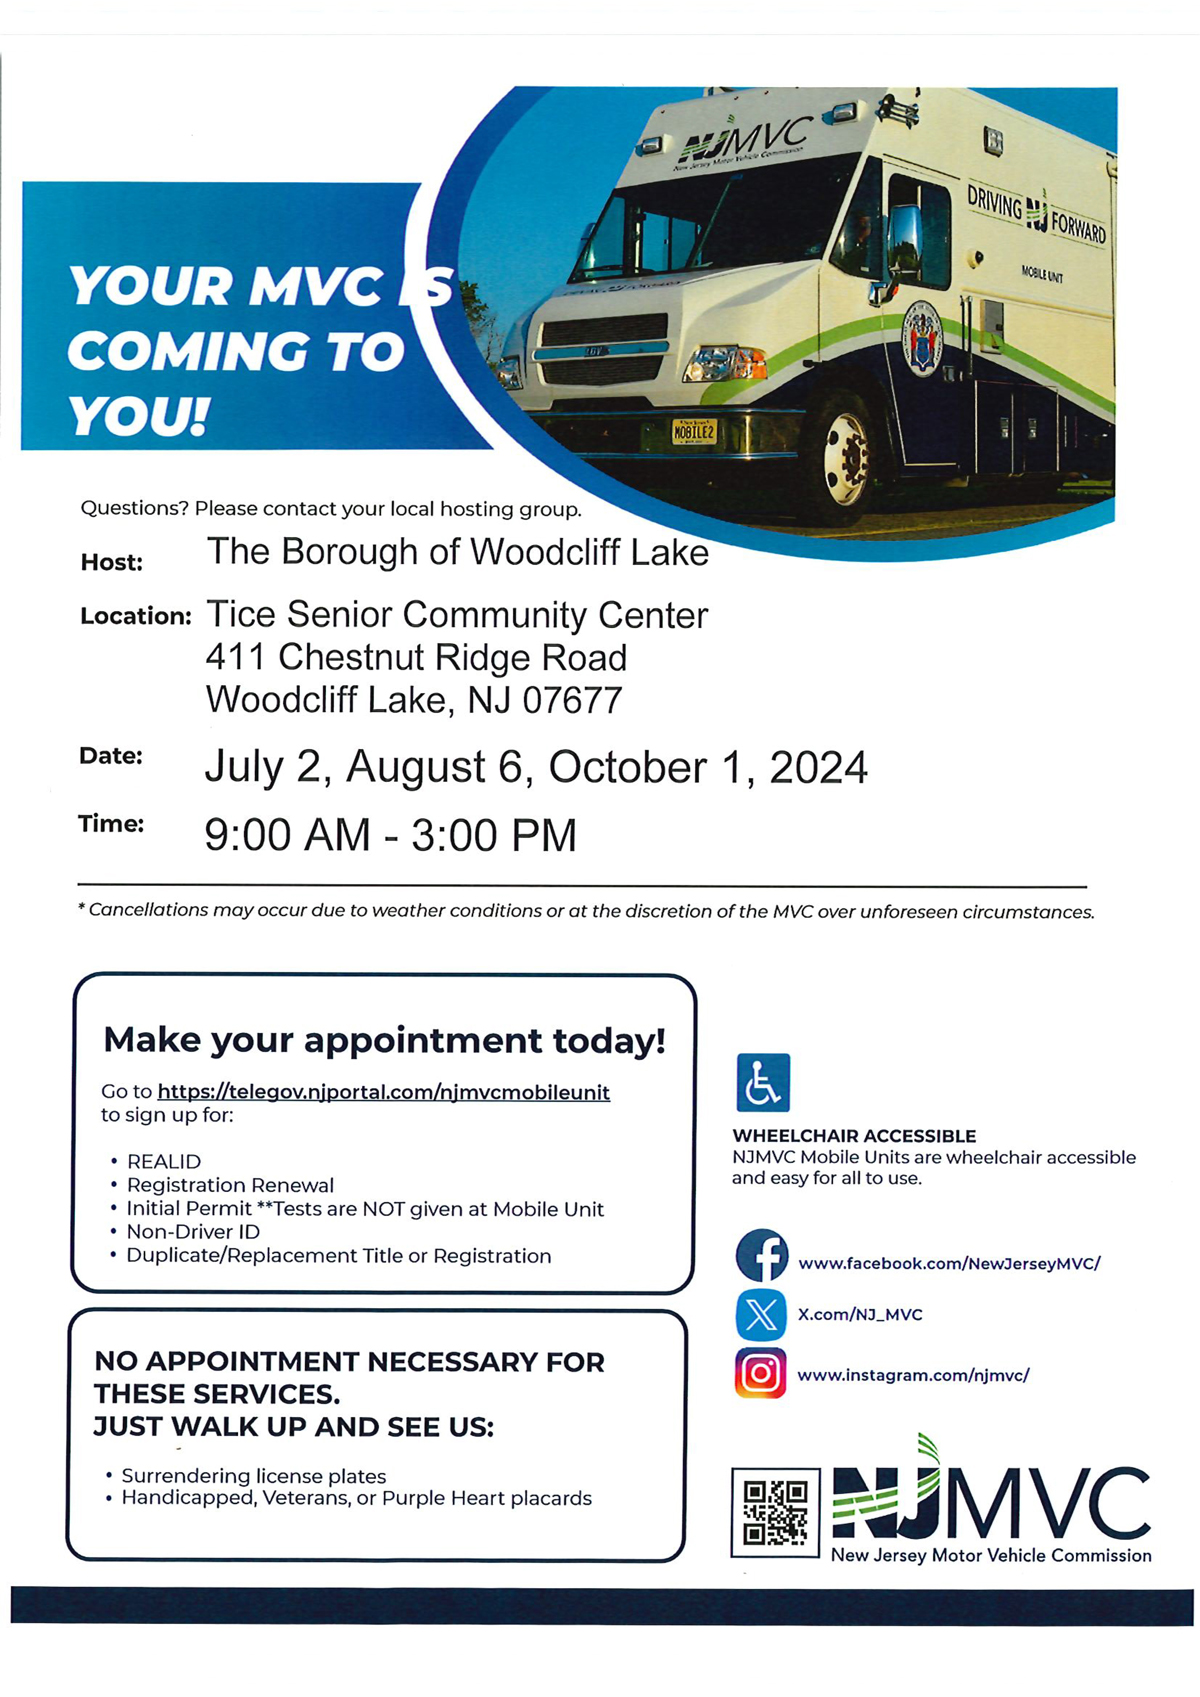 MVC Mobile Unit flyer for Woodcliff Lake. Click to open an OCR scanned PDF version of this flyer